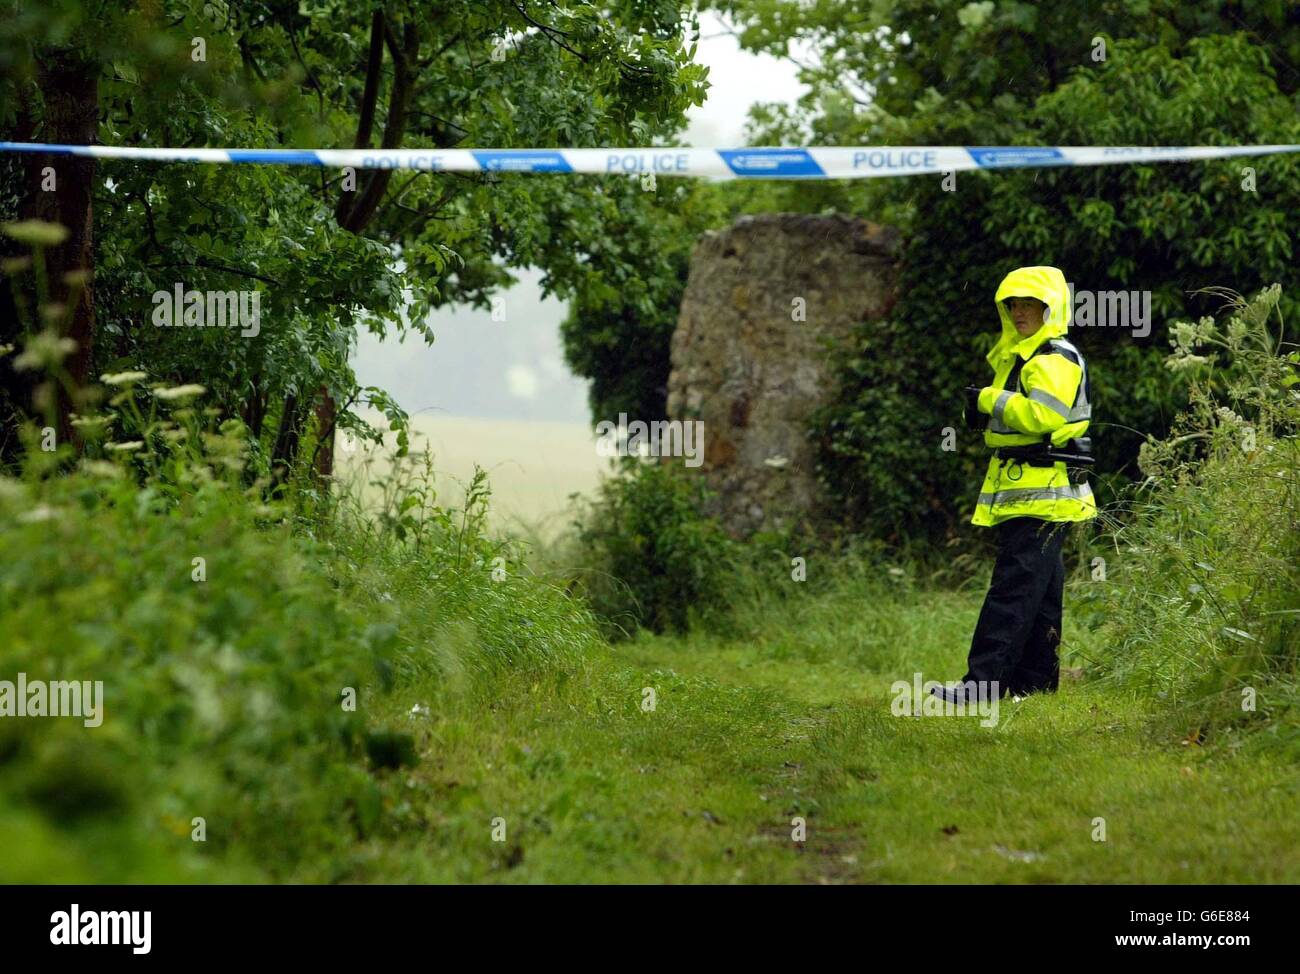 A female police officer stands in the lane where 14-year-old Jodi Jones' body was found. The schoolgirl's body was discovered in a wooded area behind a school in Dalkeith, Midlothian. * Detective Superintendent Craig Dobbie. who is leading the investigation, told a media briefing that the violent death was discovered by family members who had alerted police to her disappearance. Stock Photo